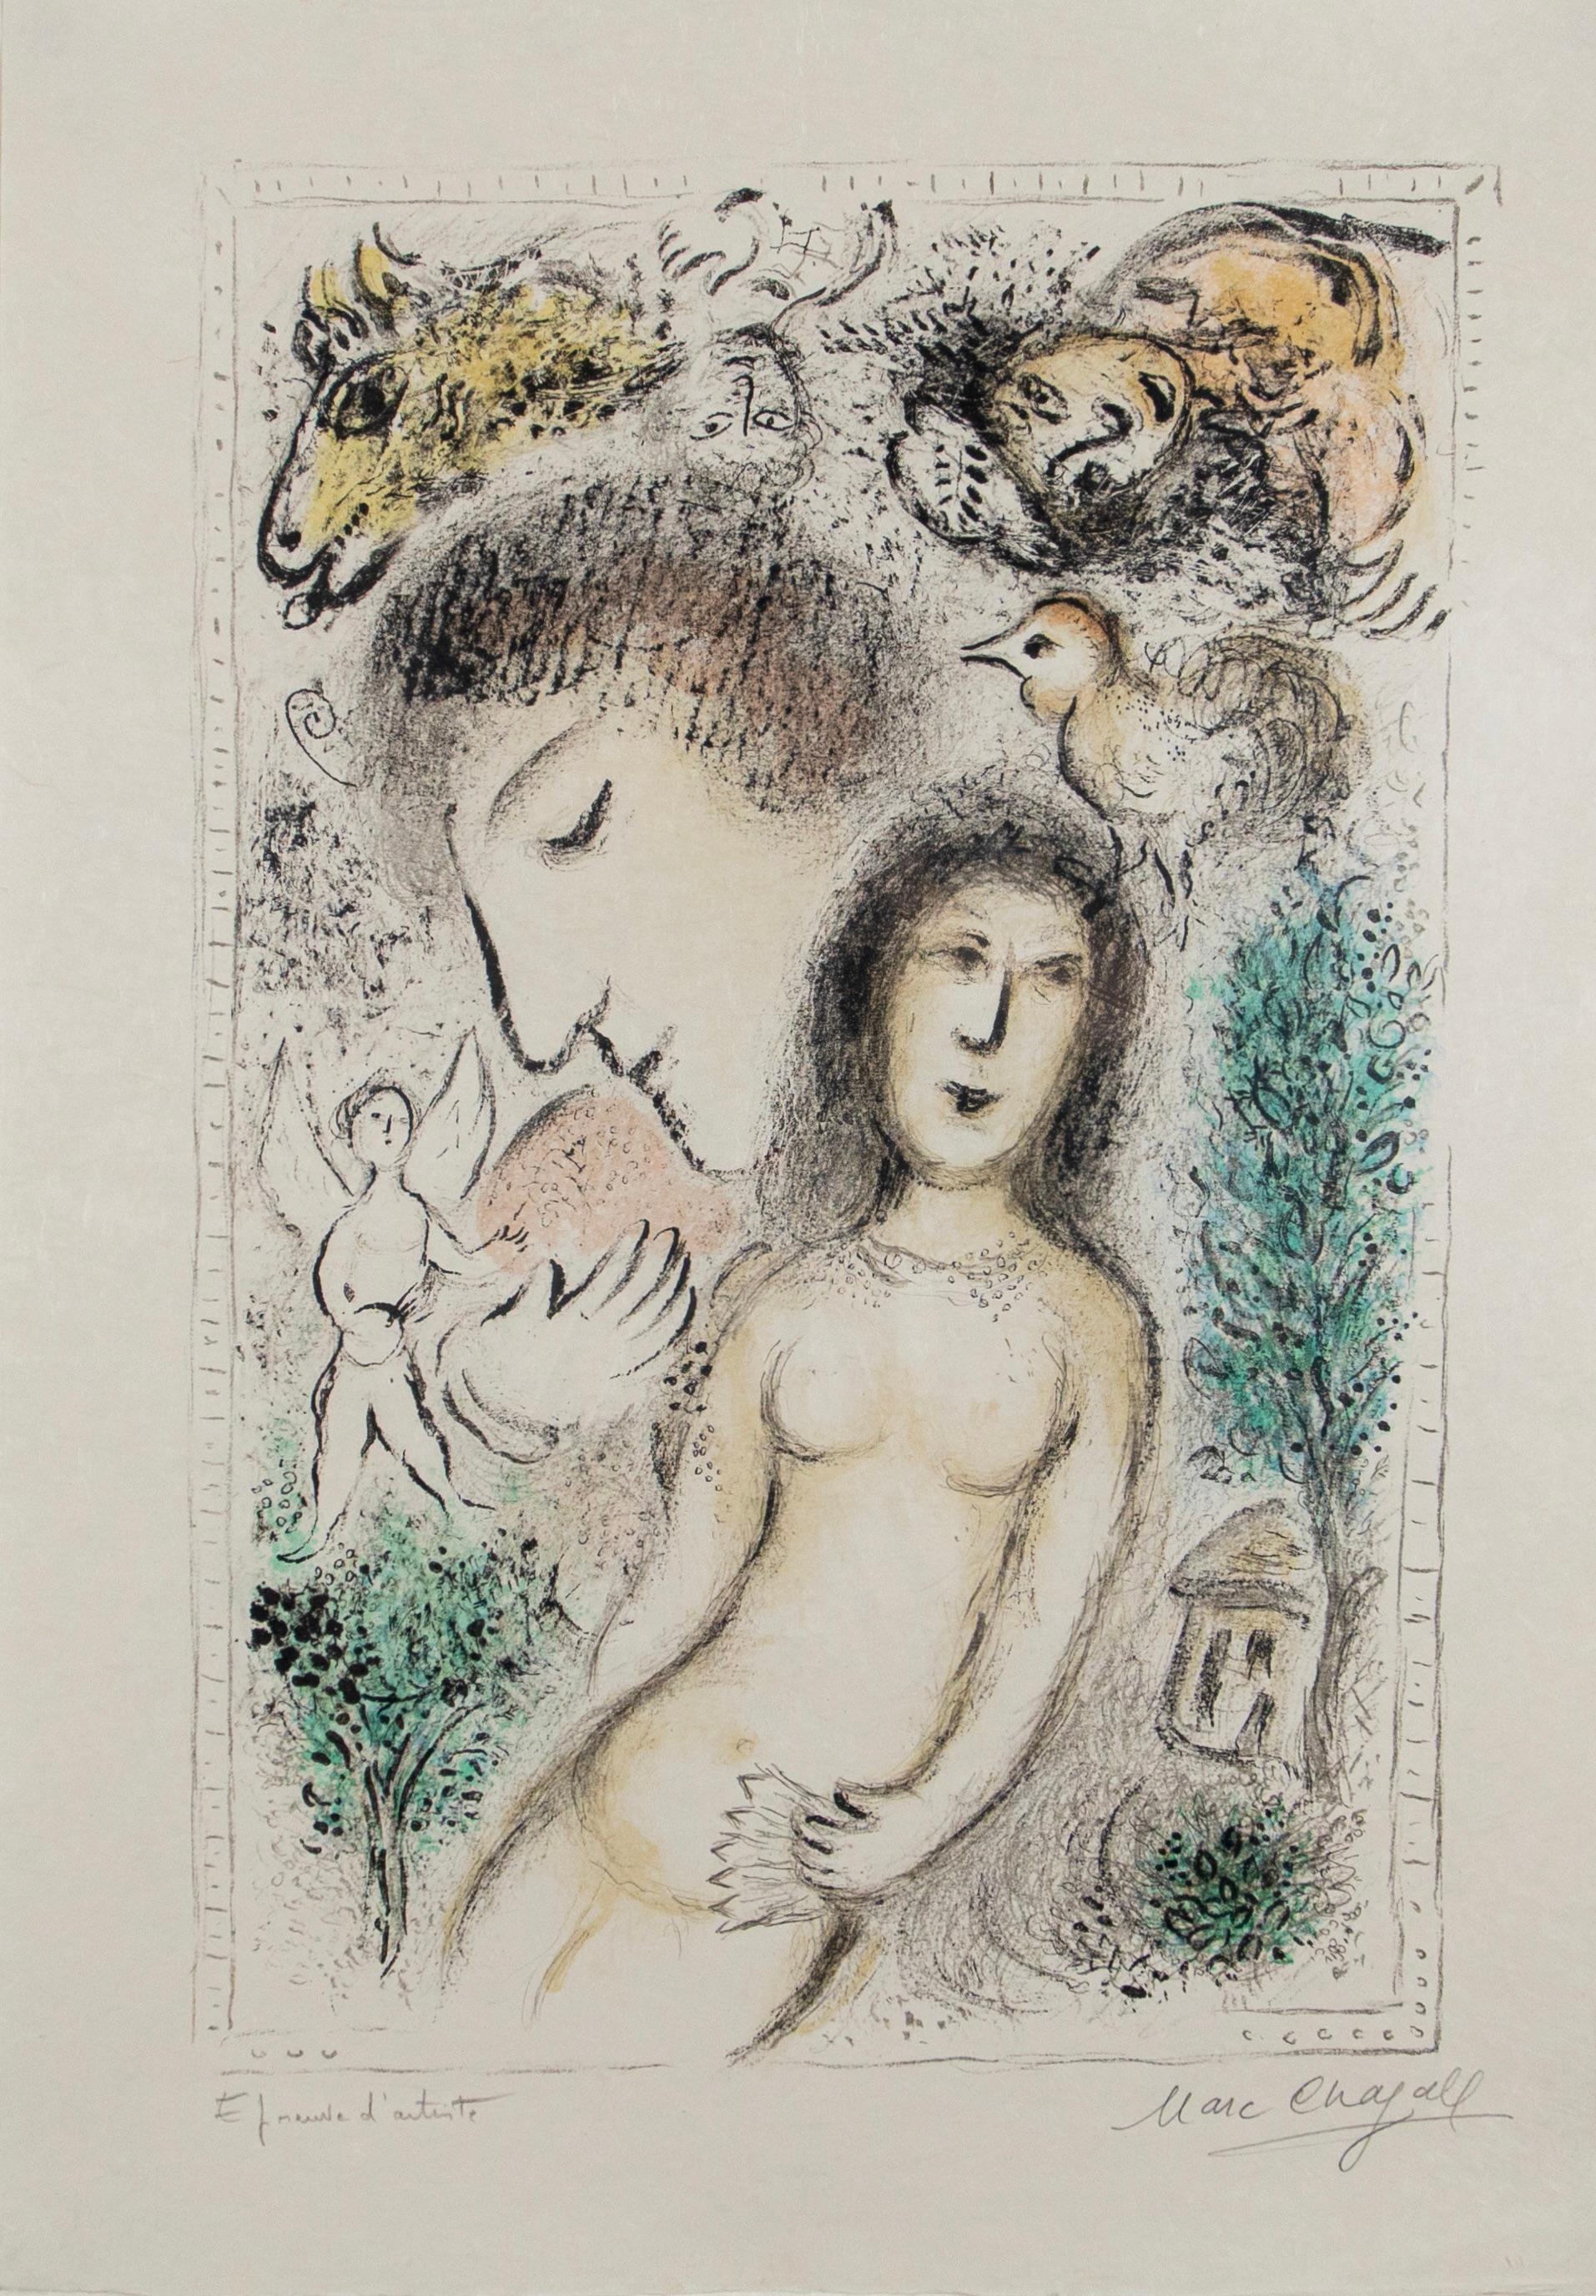 Who is Marc Chagall?